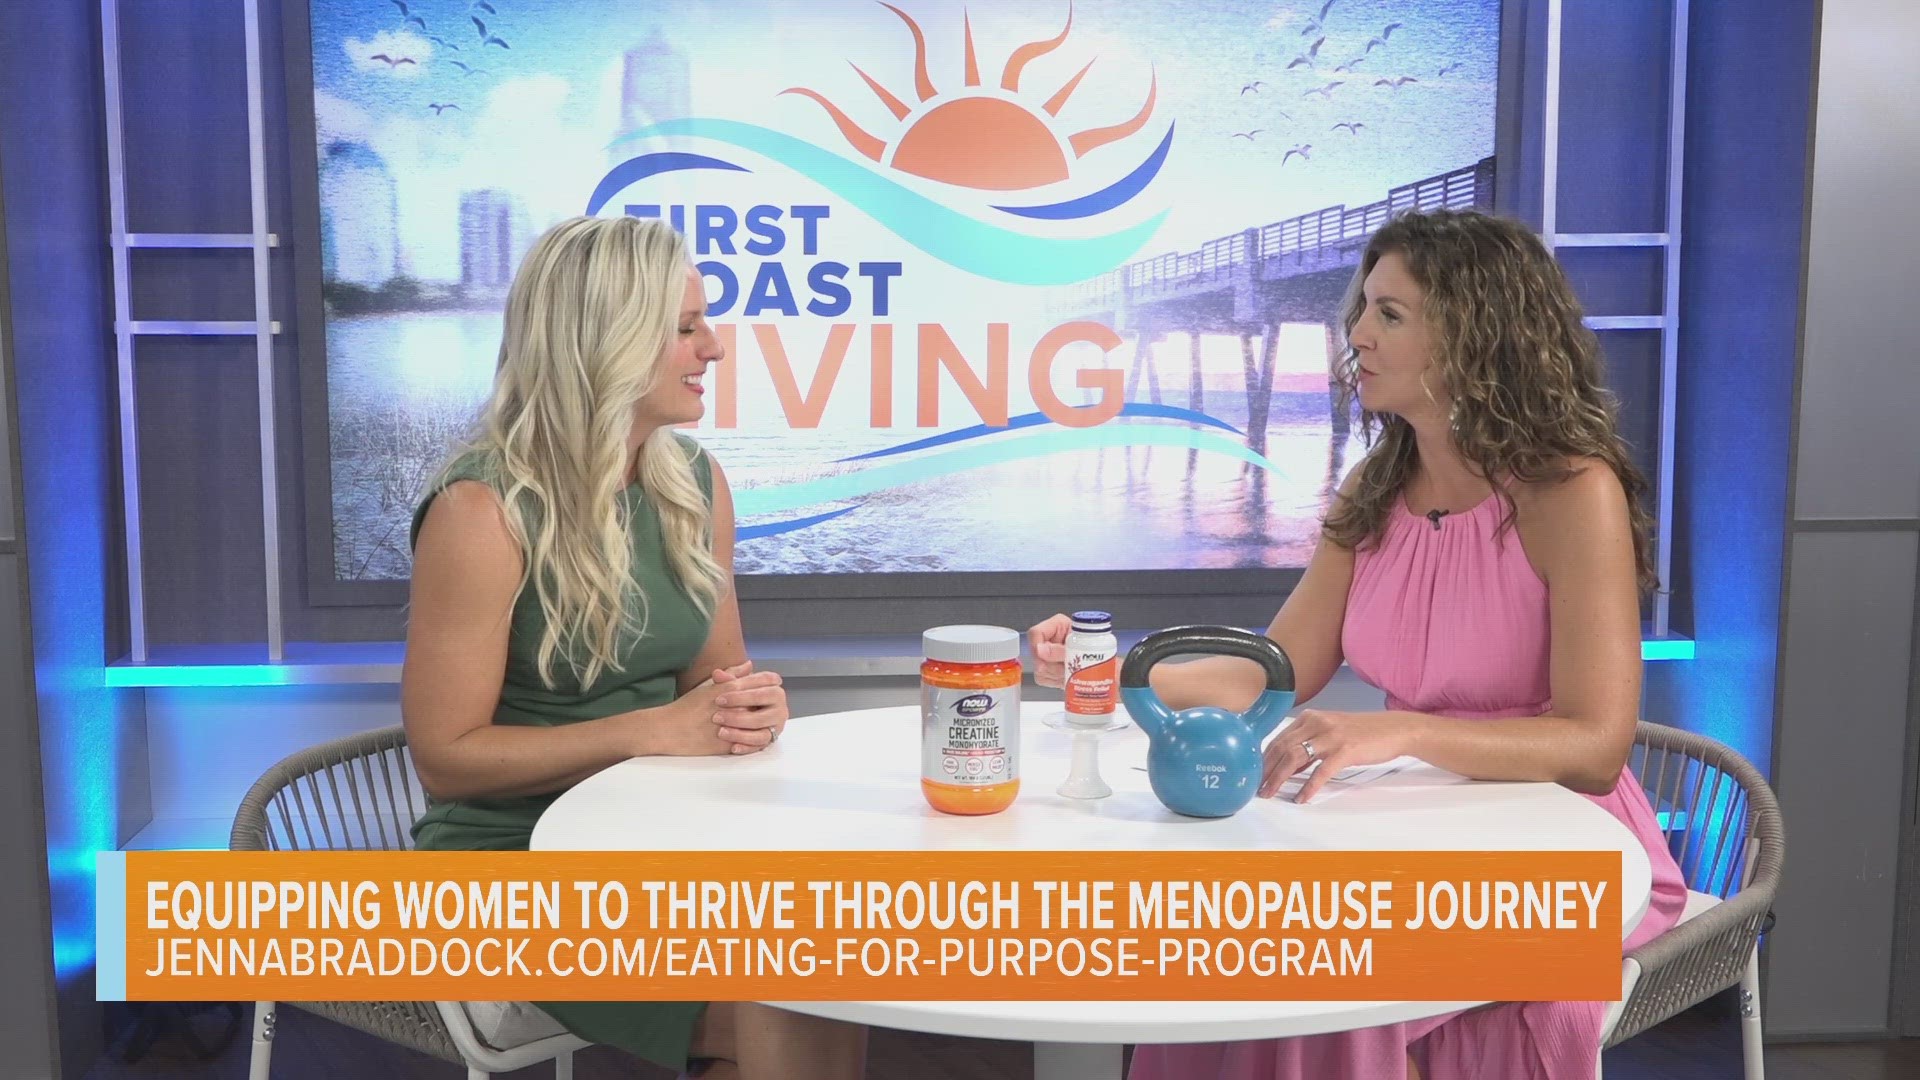 Jenna Braddock has some healthy eating tips for women going through menopause.